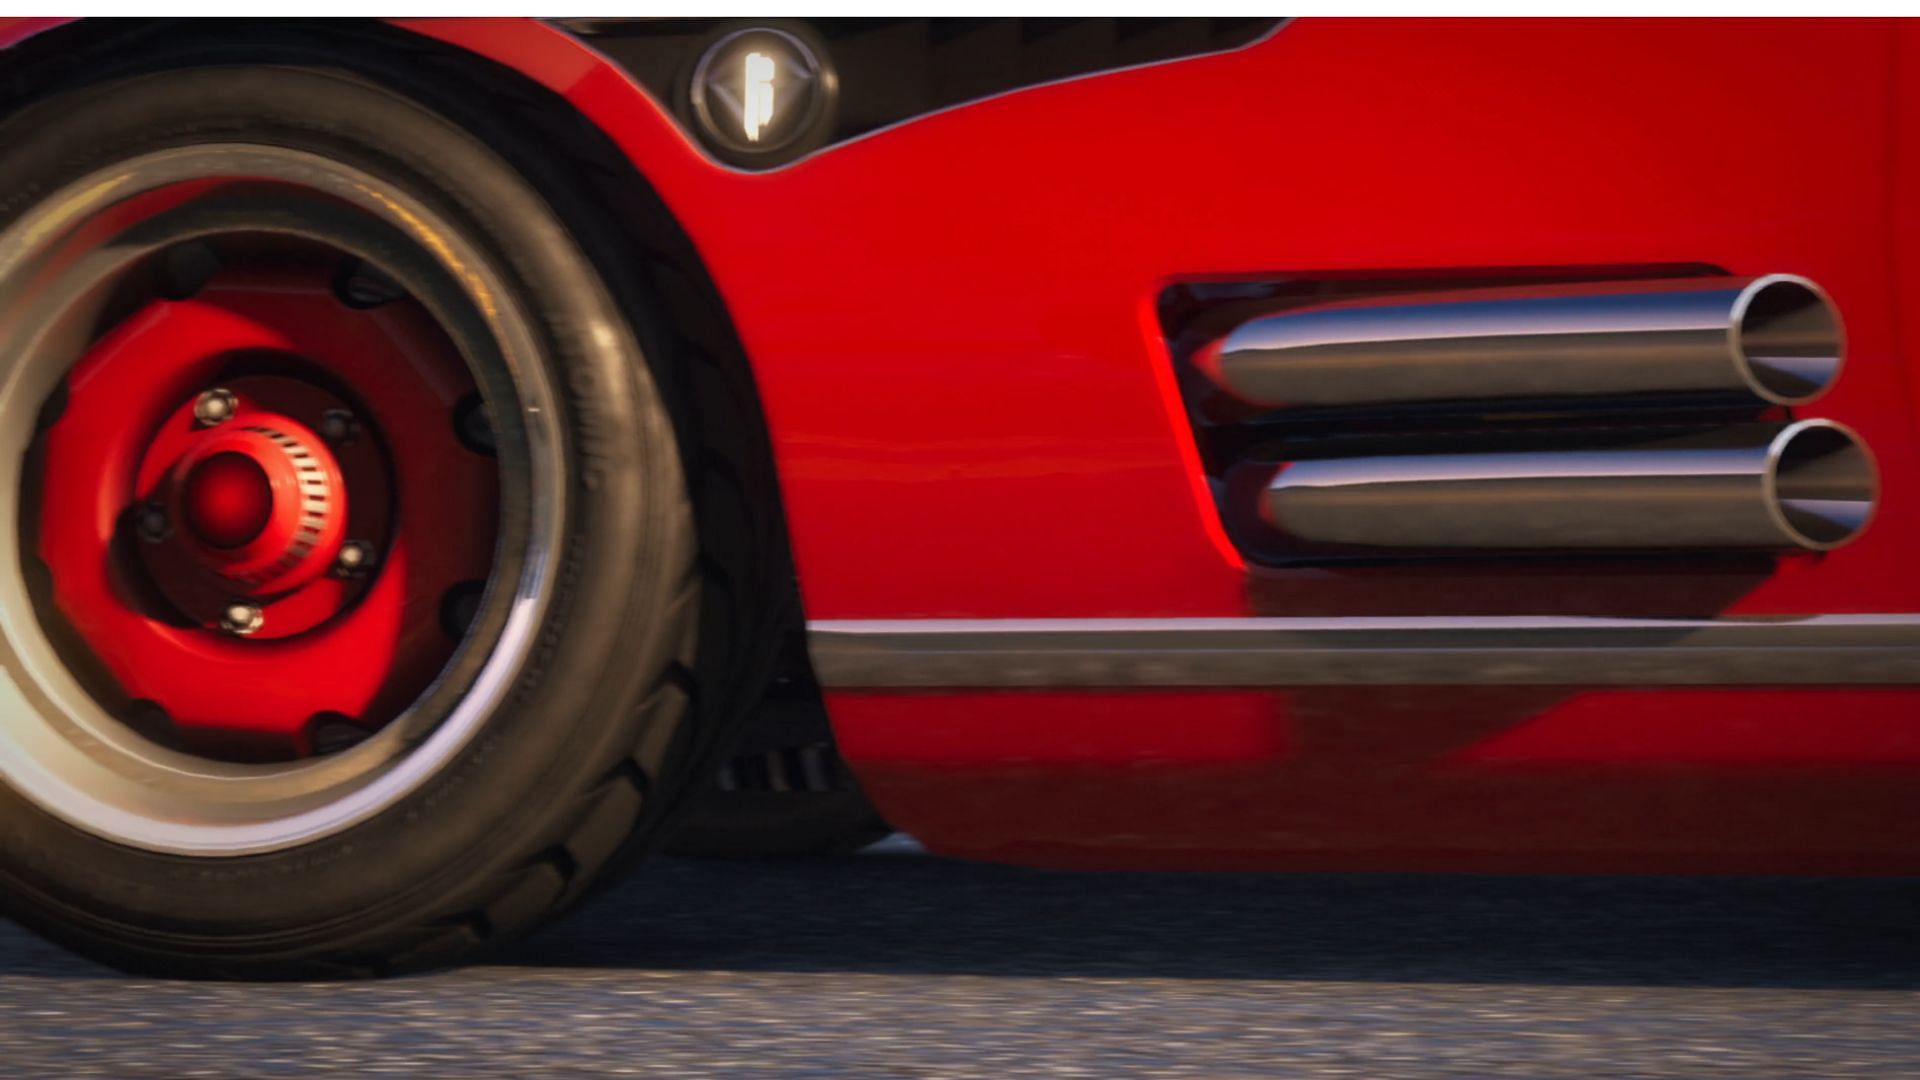 Some fans might have missed the Stirling GT in the trailer (Image via Rockstar Games)